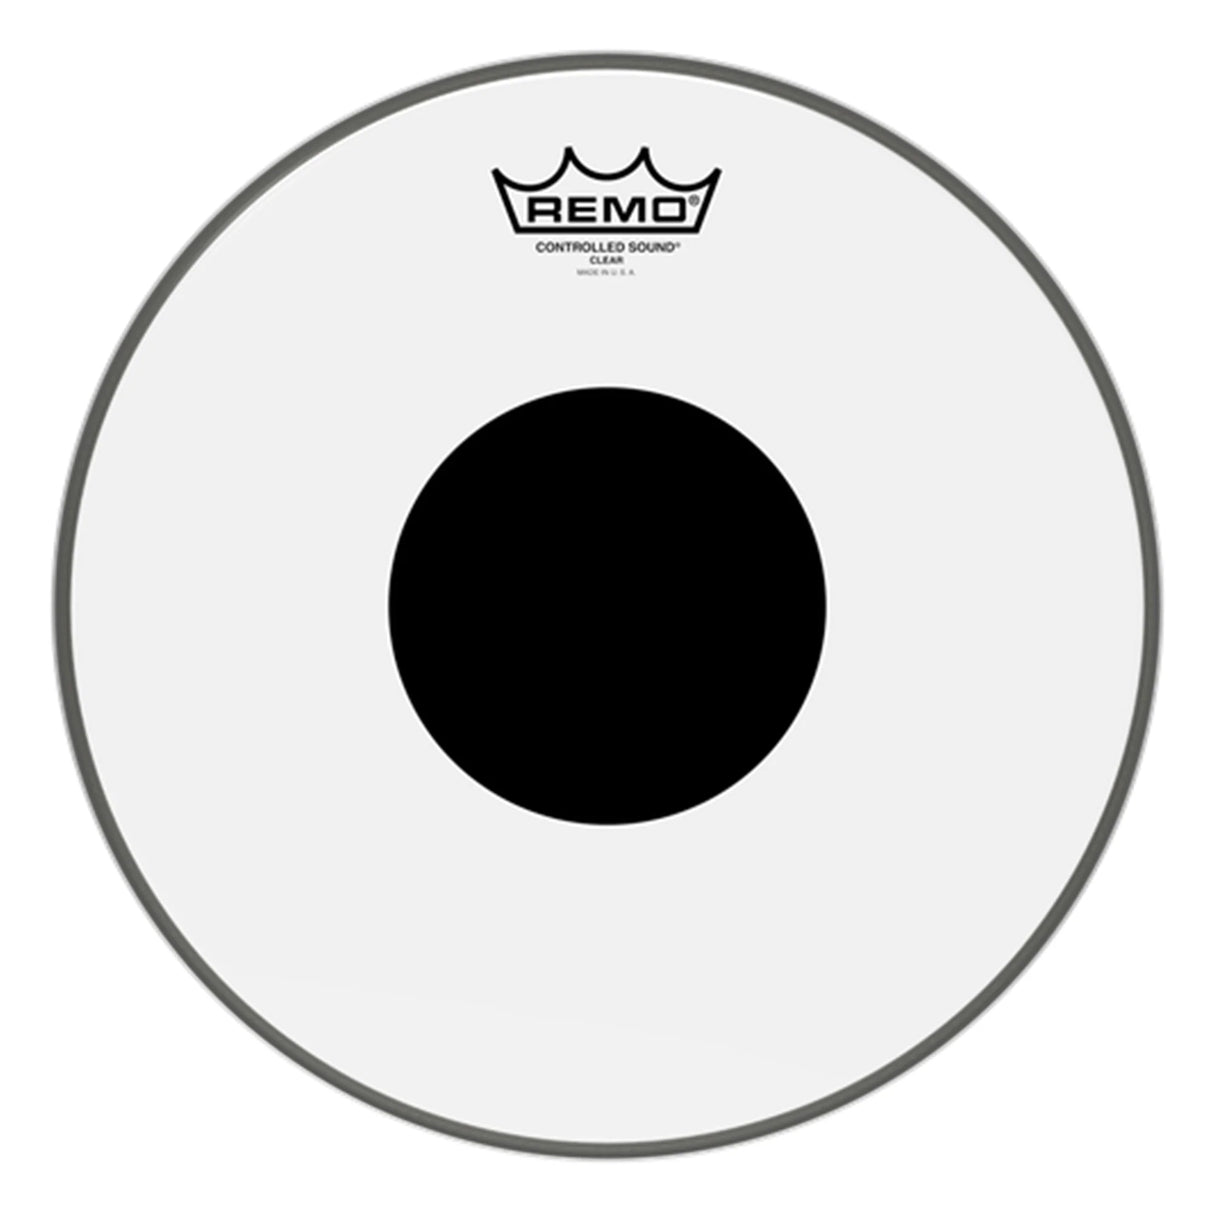 REMO Batter, CONTROLLED SOUND®, Clear, 12" Diameter, BLACK DOT™ On Top